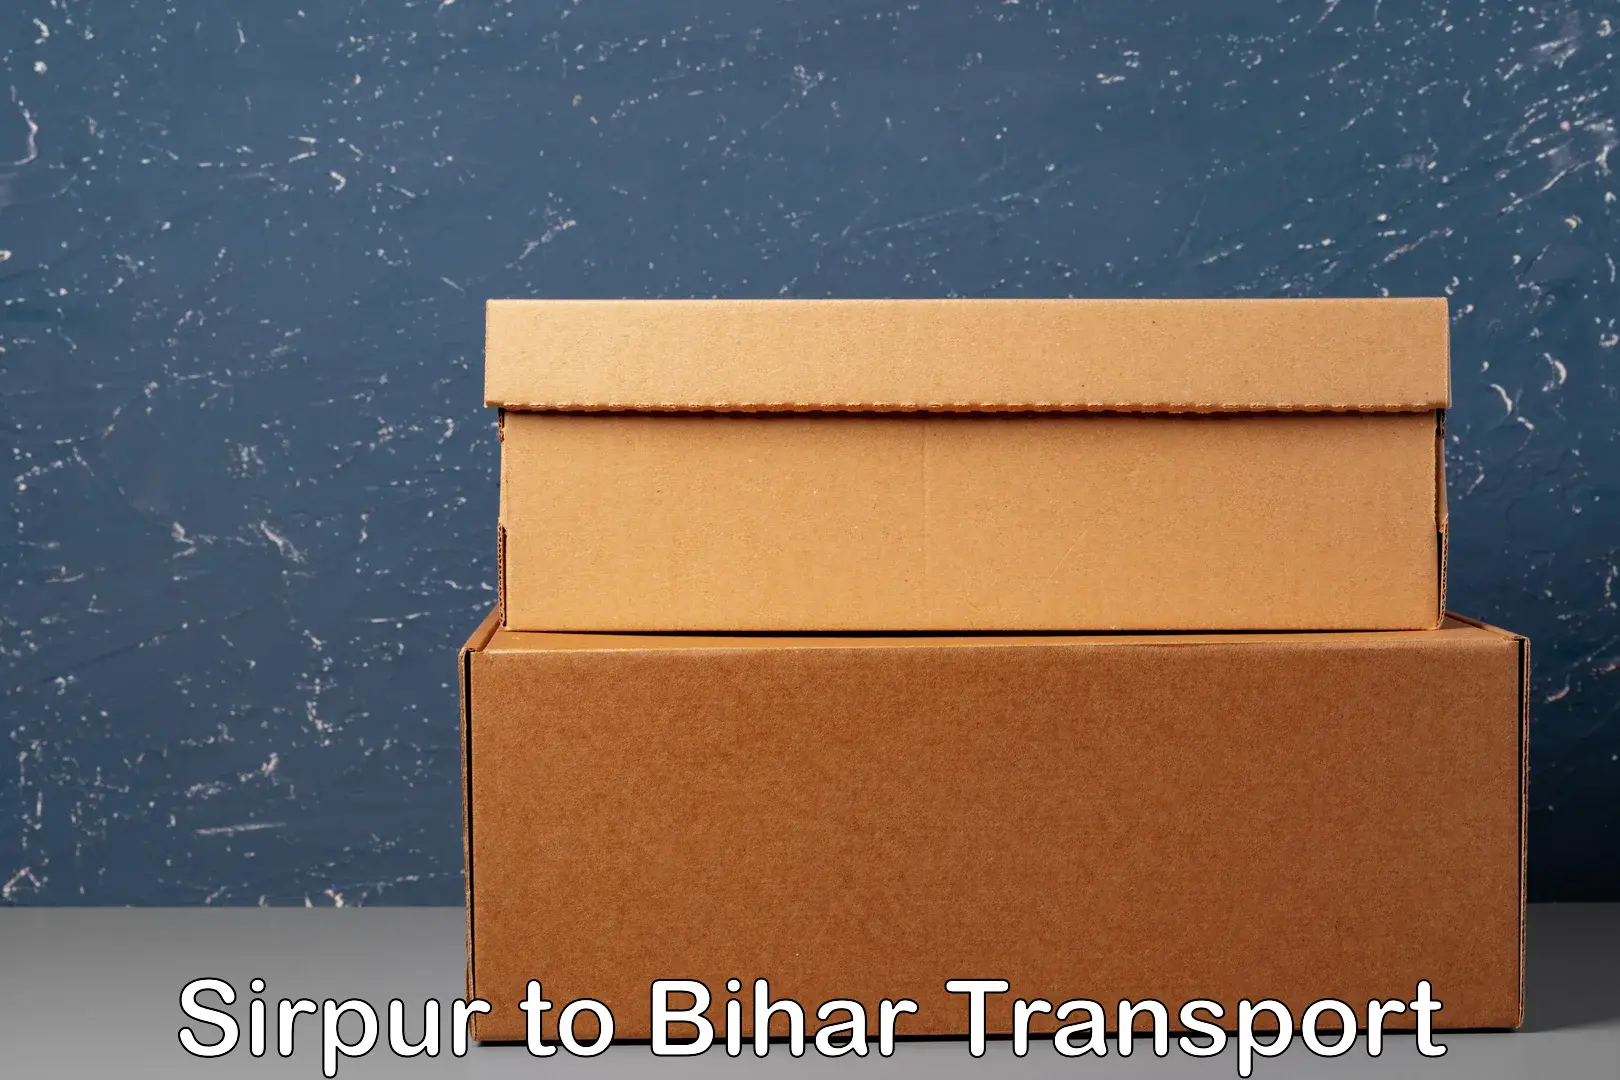 Vehicle transport services Sirpur to Dhaka